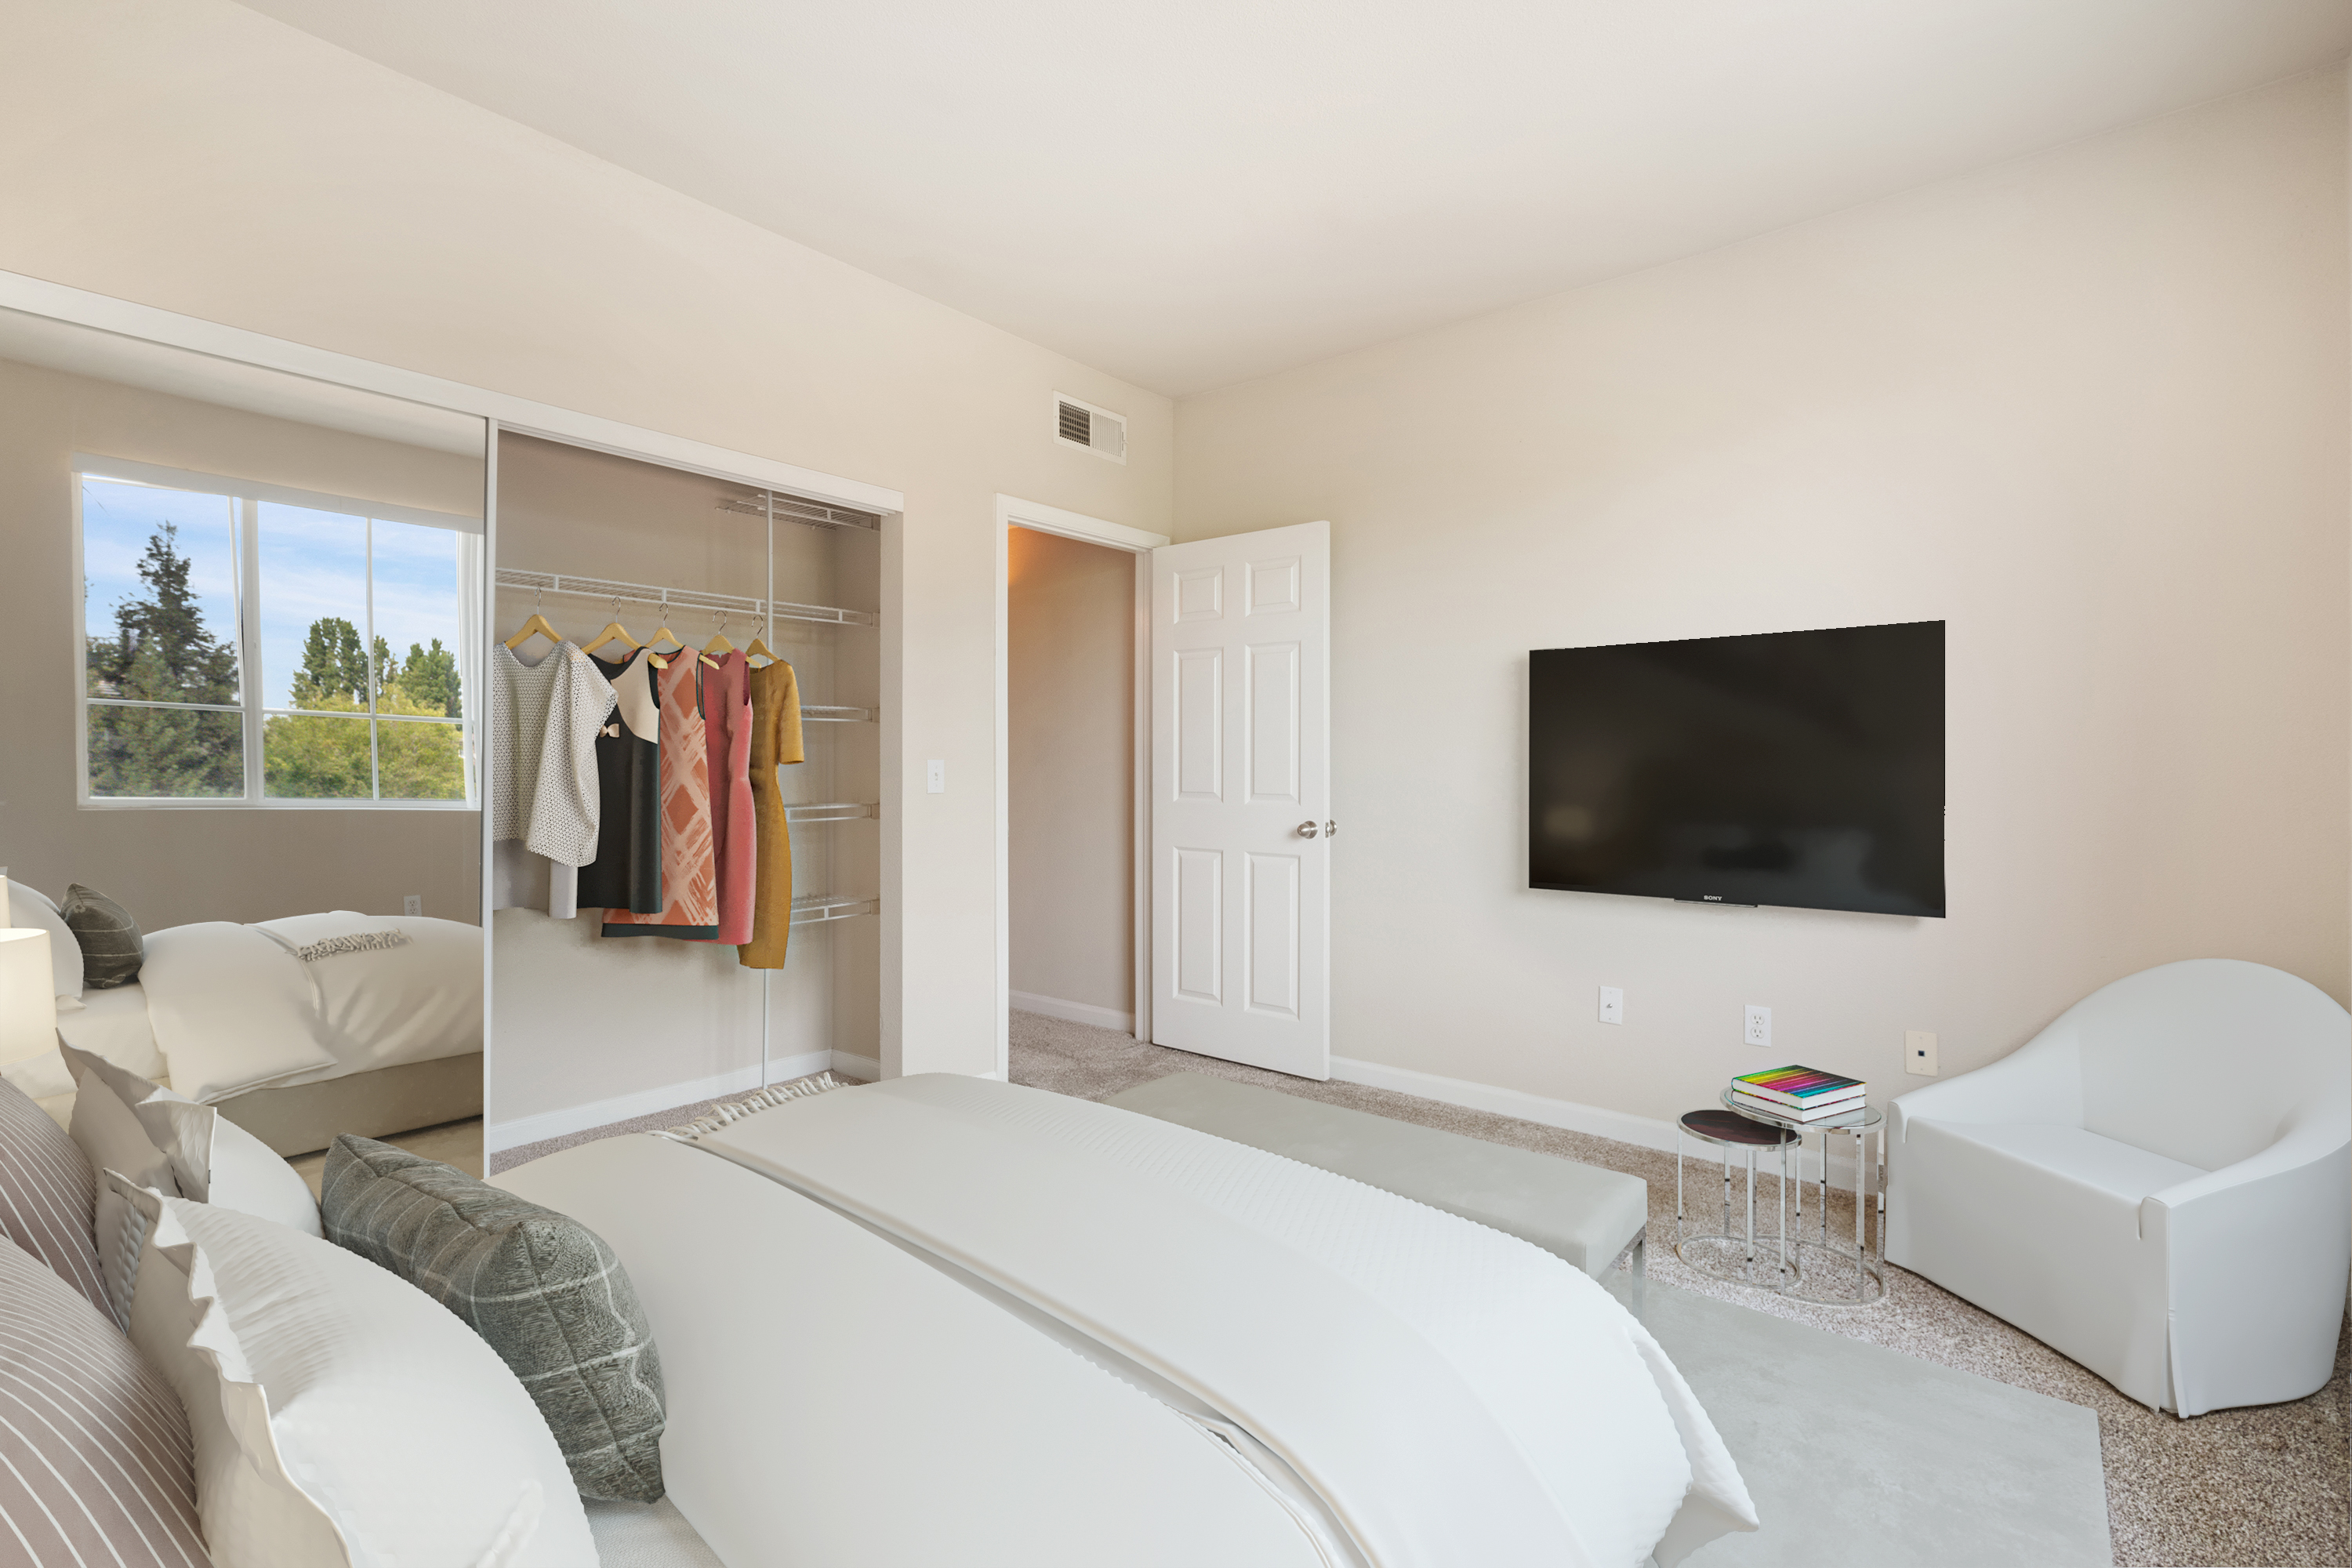 The Pros and Cons of Virtual Staging in Real Estate